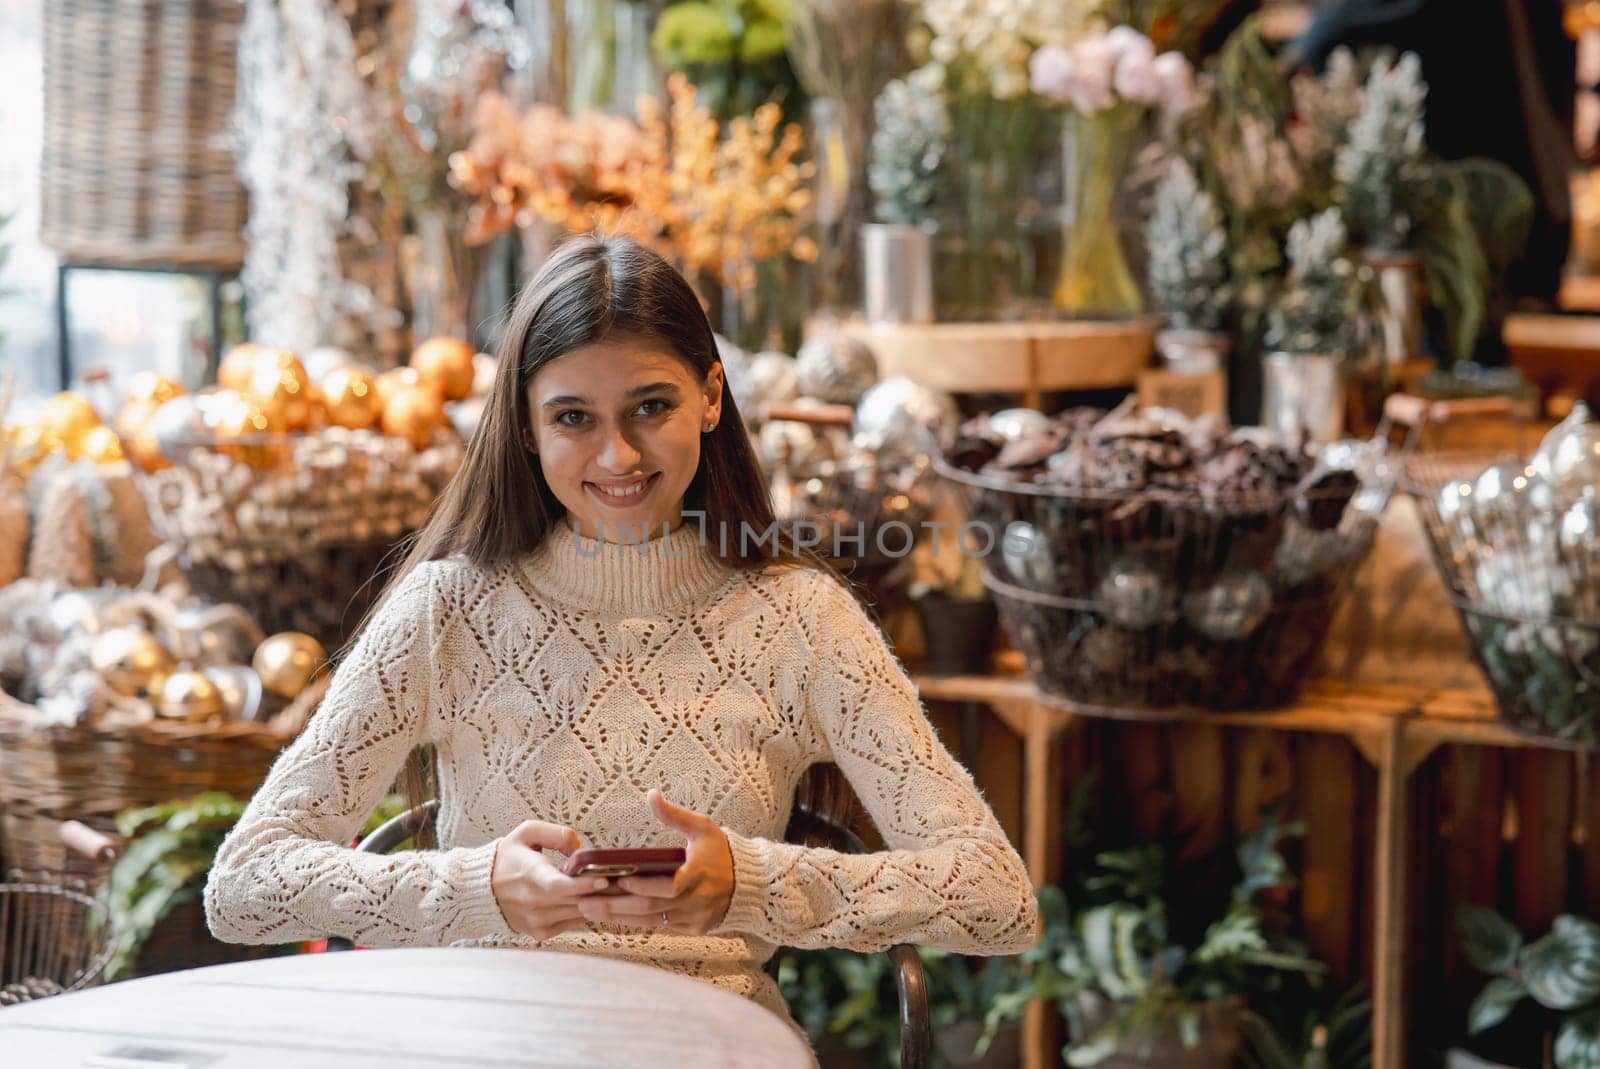 In the decor store, a young woman is seen holding her phone. by teksomolika